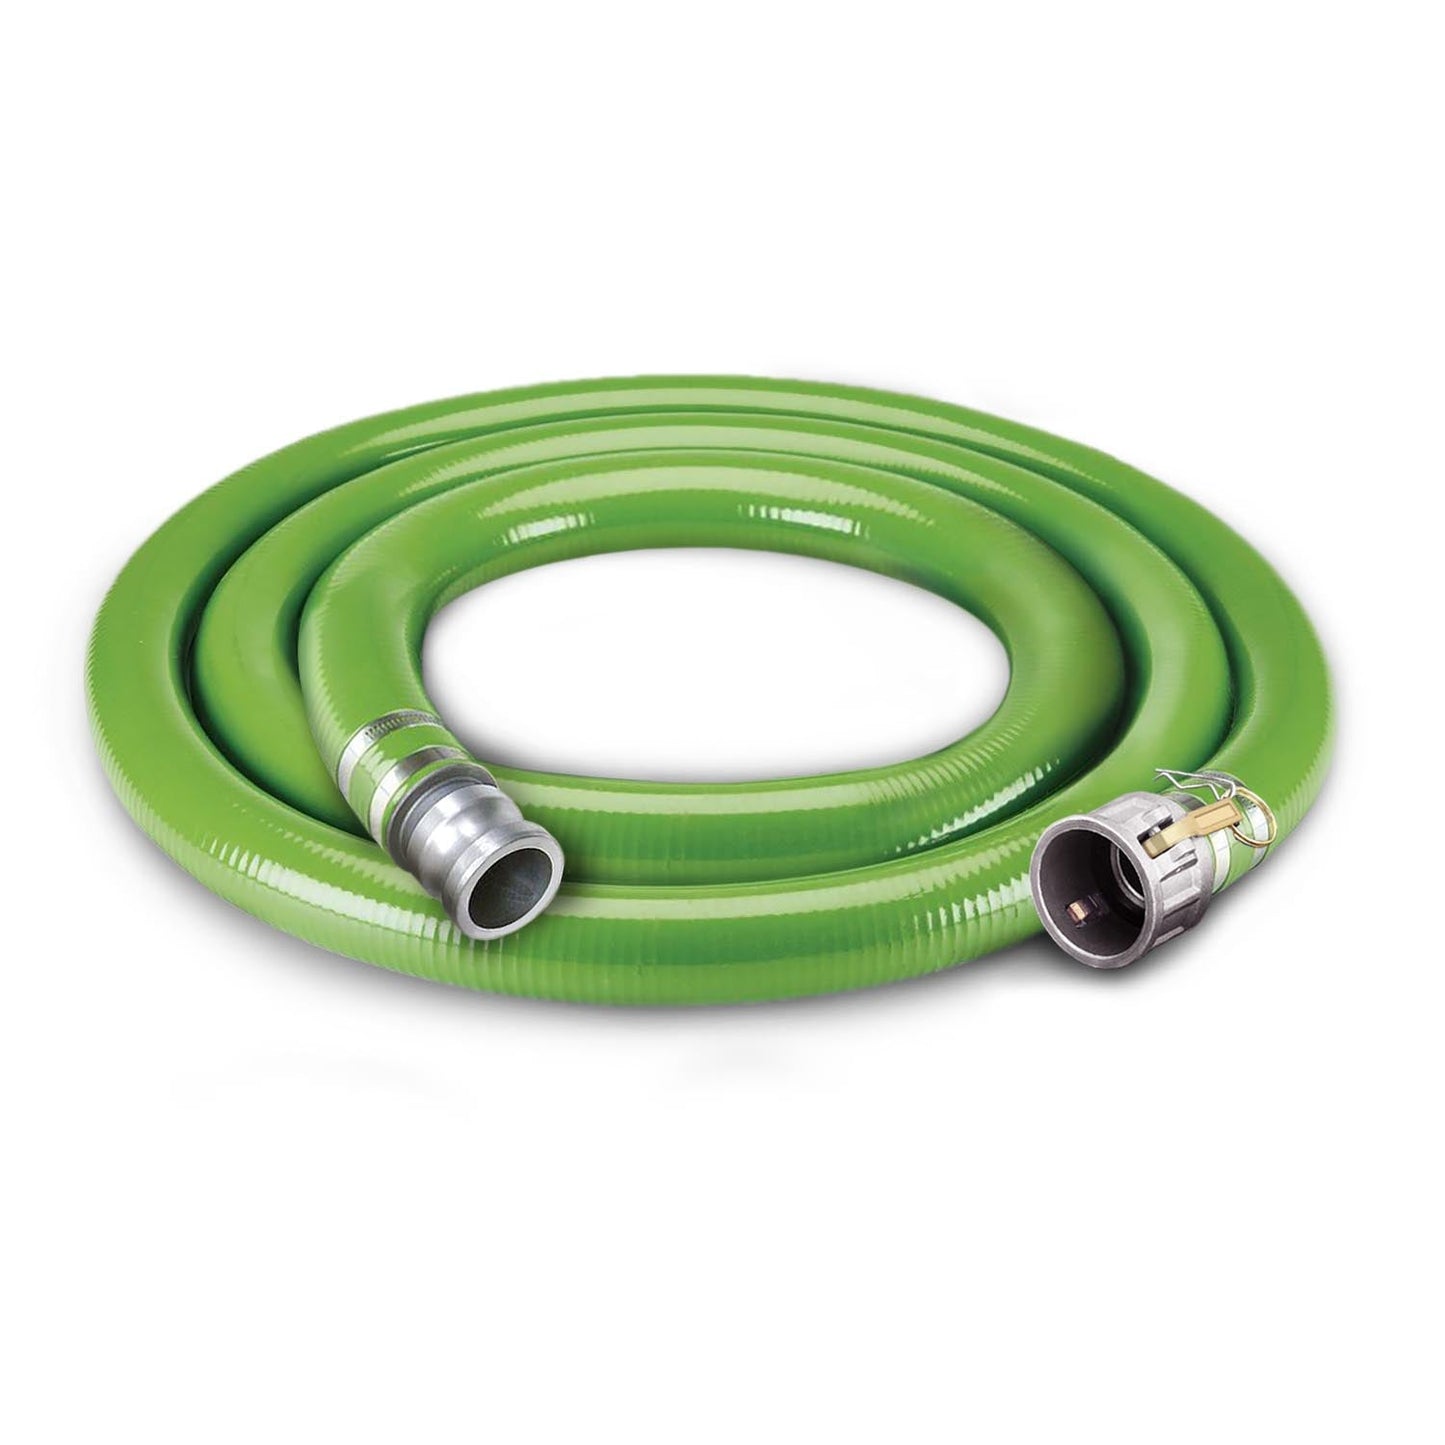 Foresee PVC 20 FT Suction Hose with Camlock Type C and E Couplings